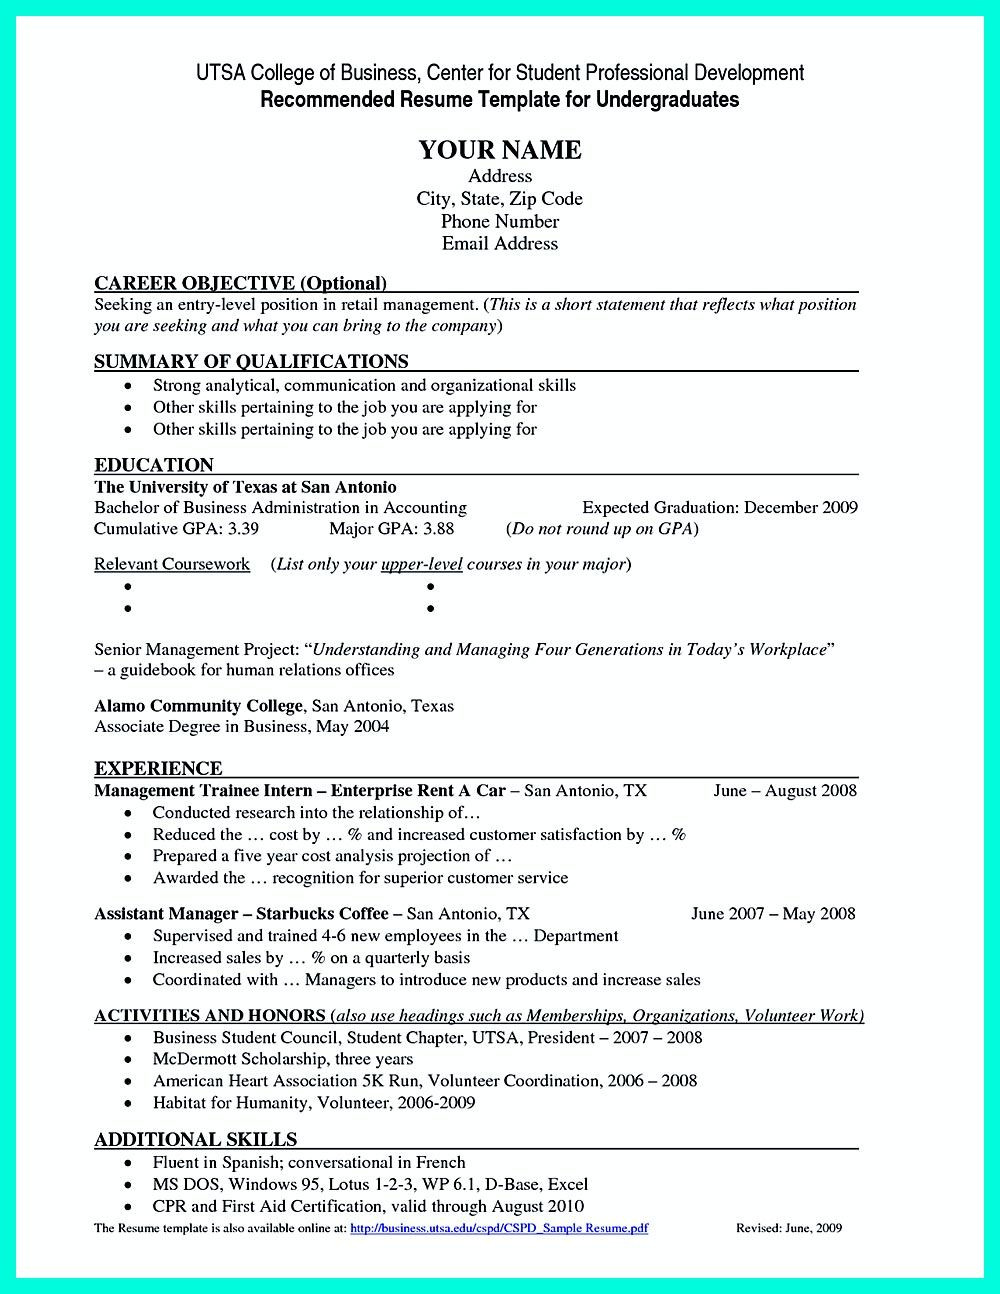 Sample Resume Templates for College Students Best Current College Student Resume with No Experience Job …